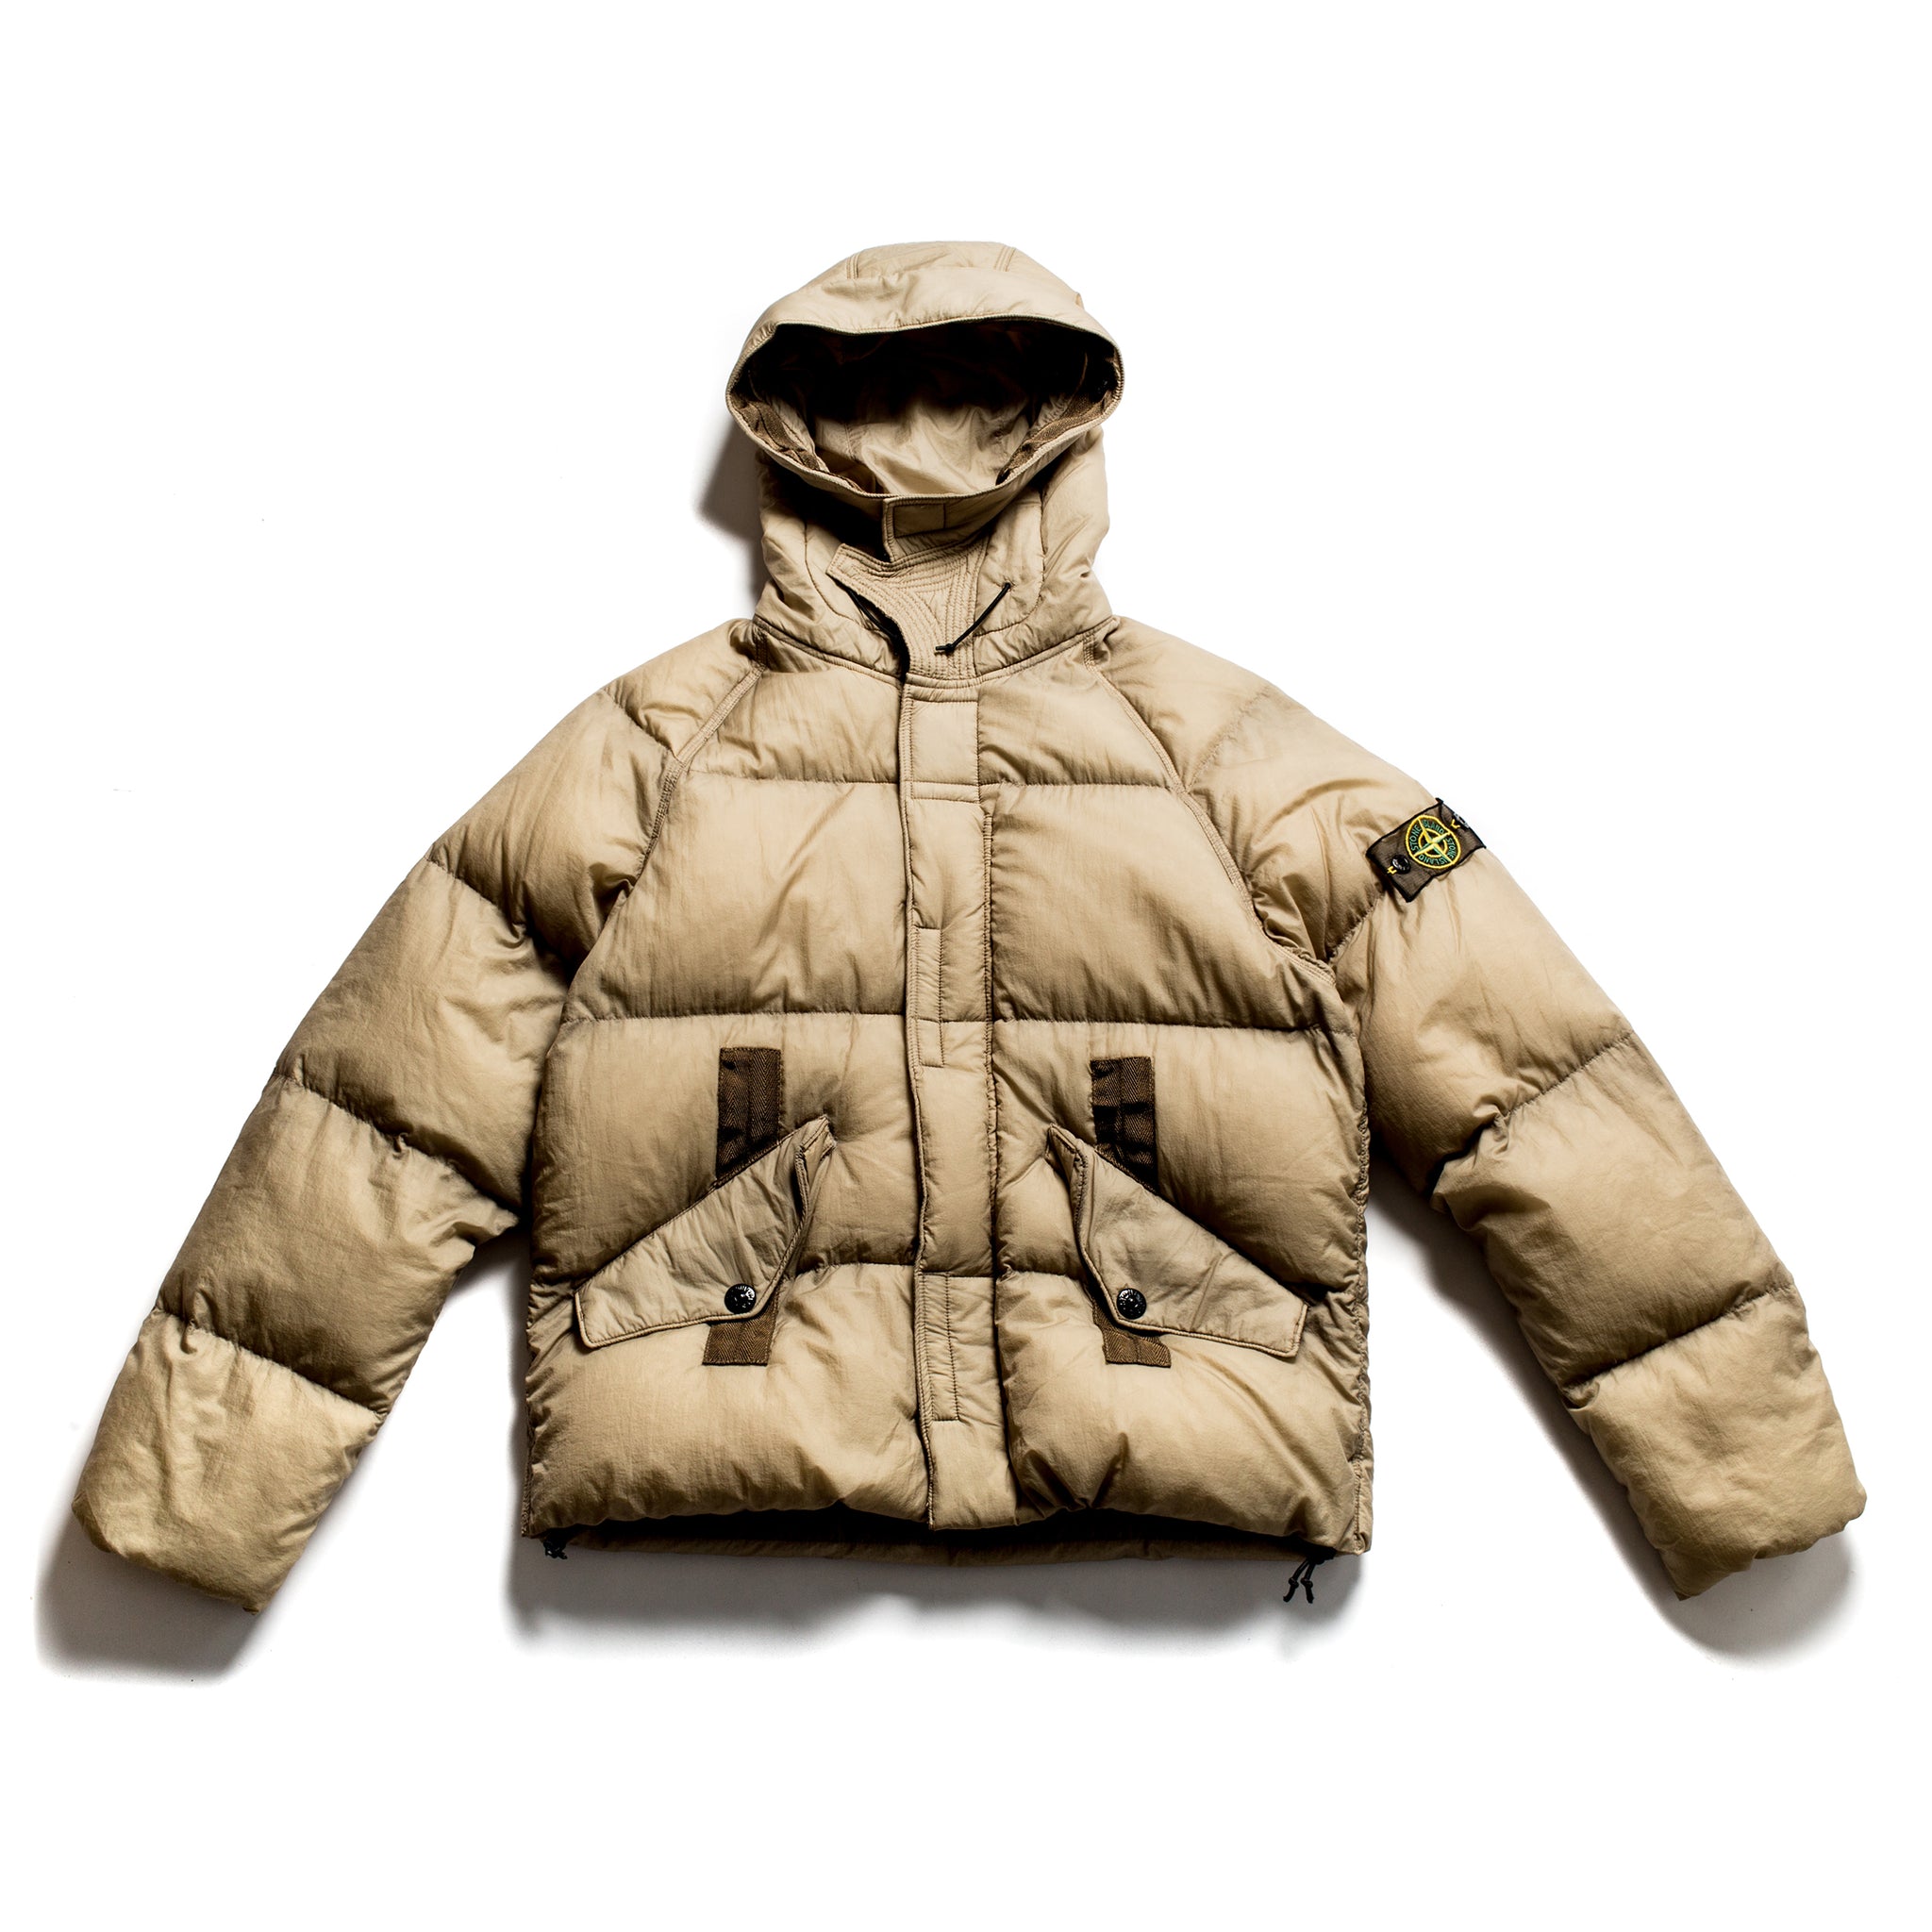 Collection 2005. Stone Island aw2006 Goose down Jacket. Stone Island Goose down 2007. Stone Island Goose down Jacket. Пуховик Stone Island Vintage down Jacket 2006.